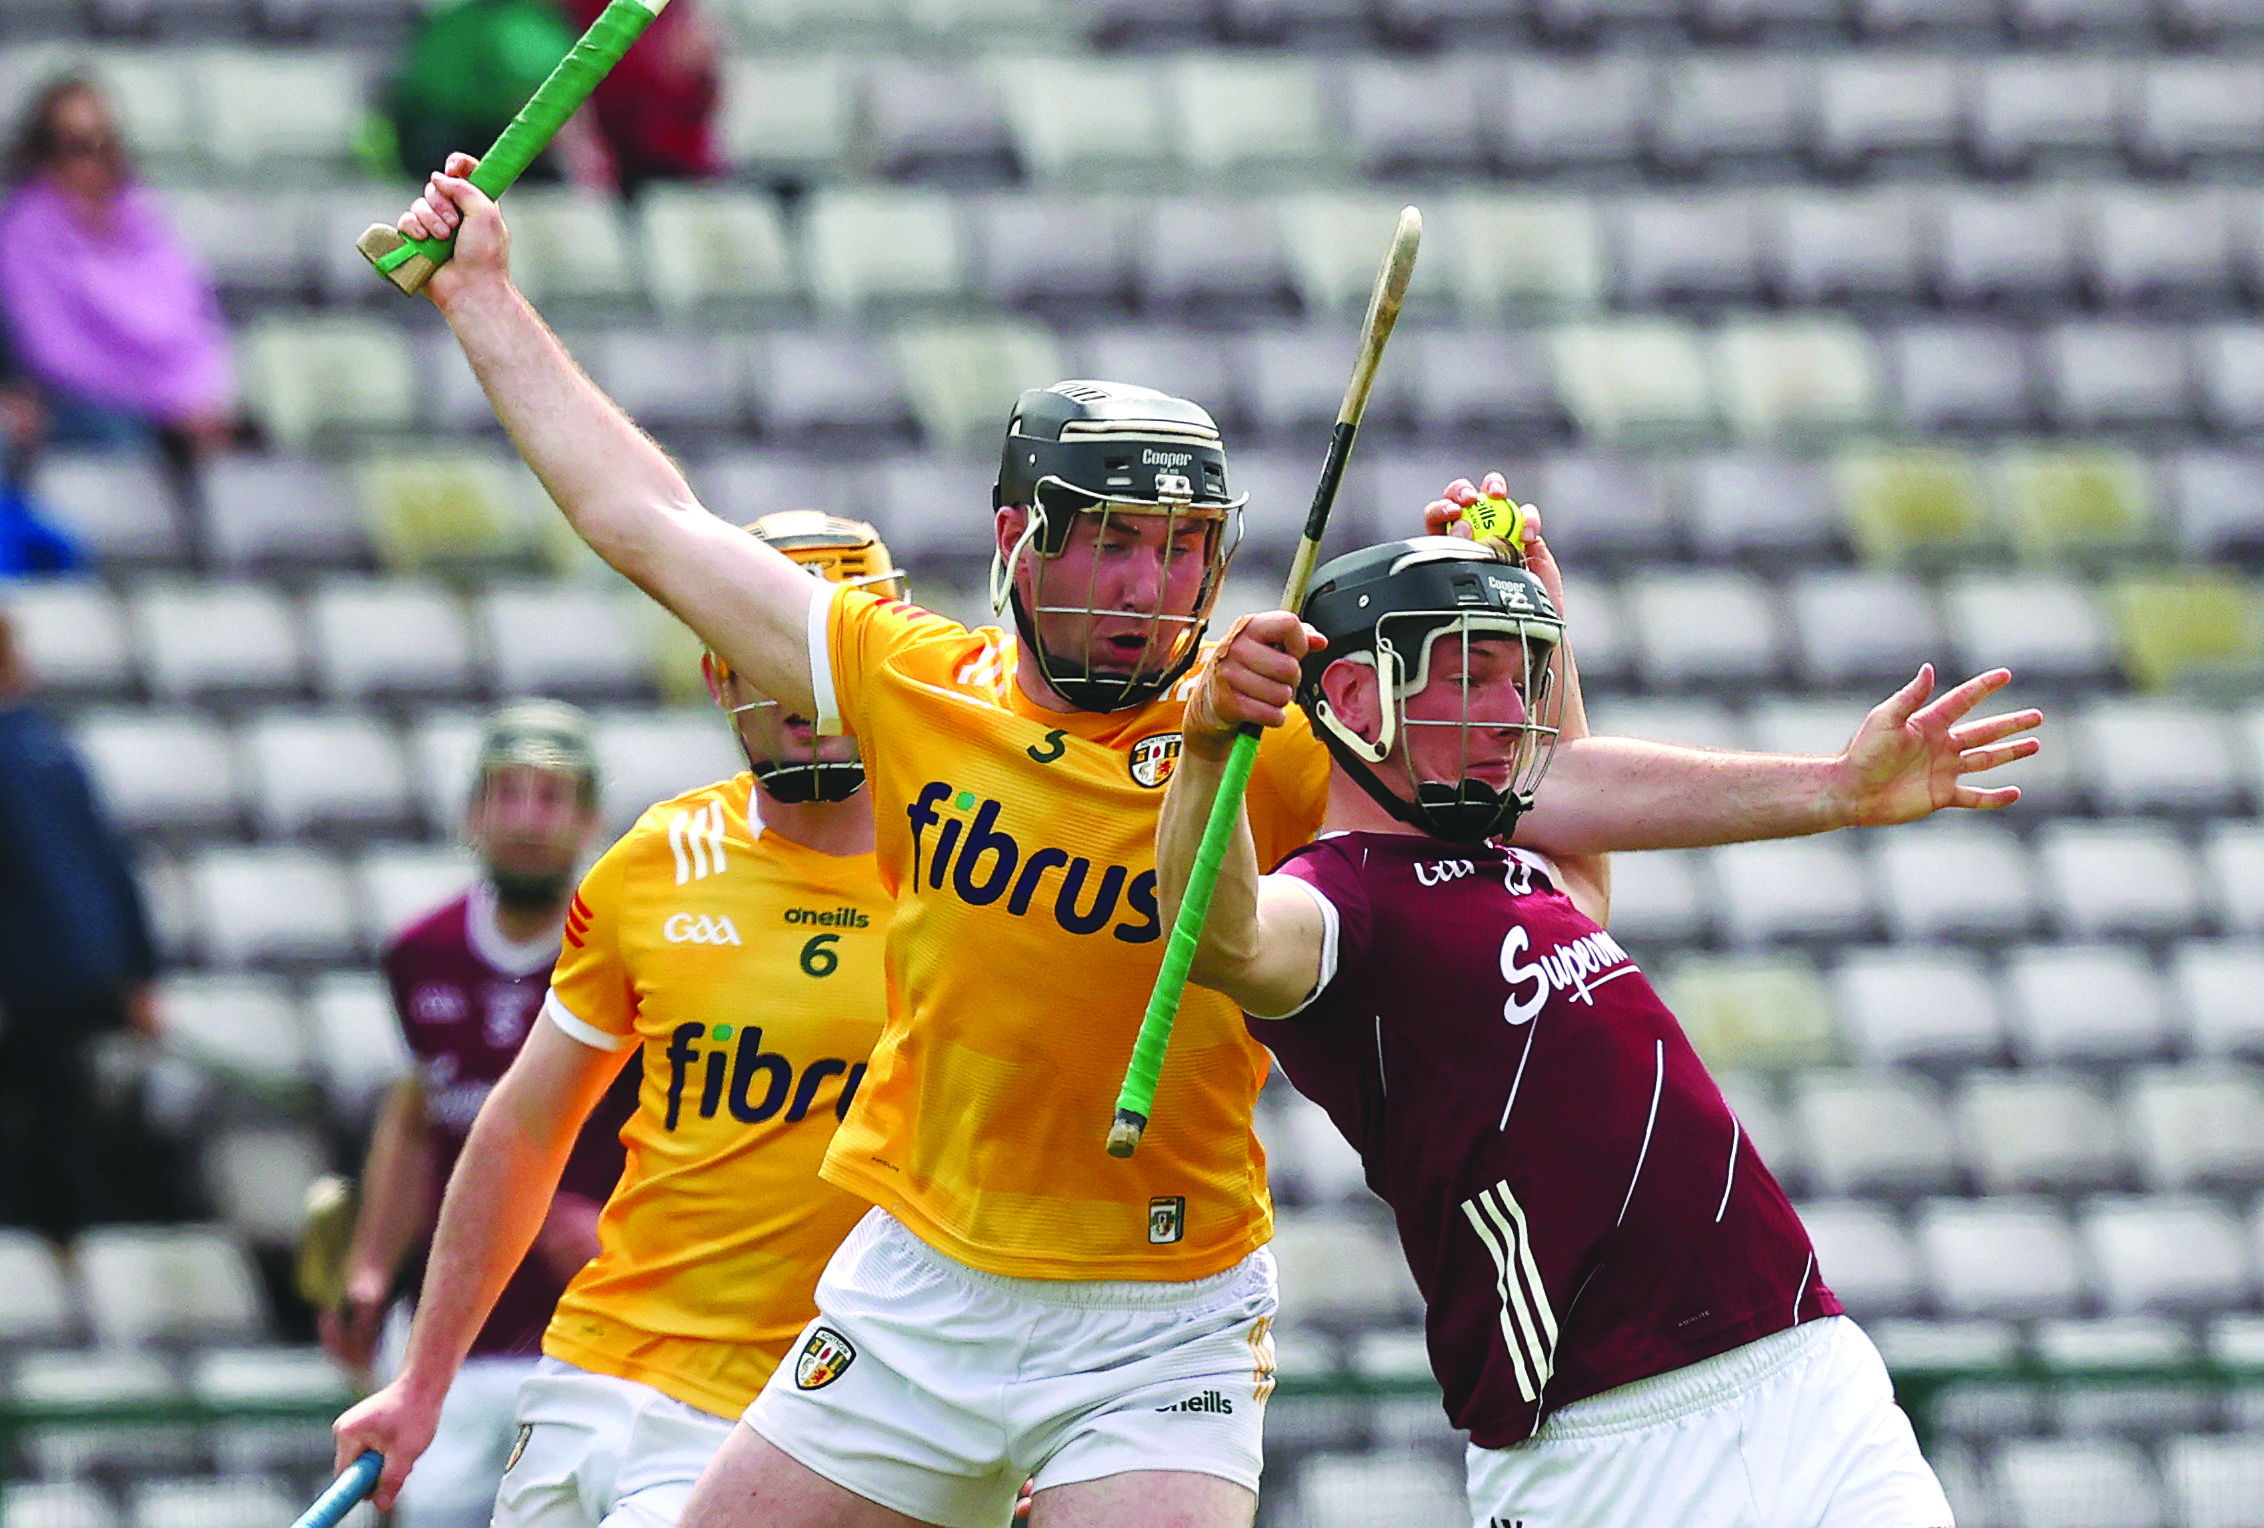 Ryan McGarry and Kevin Cooney clash during Galway’s win over Antrim last summer